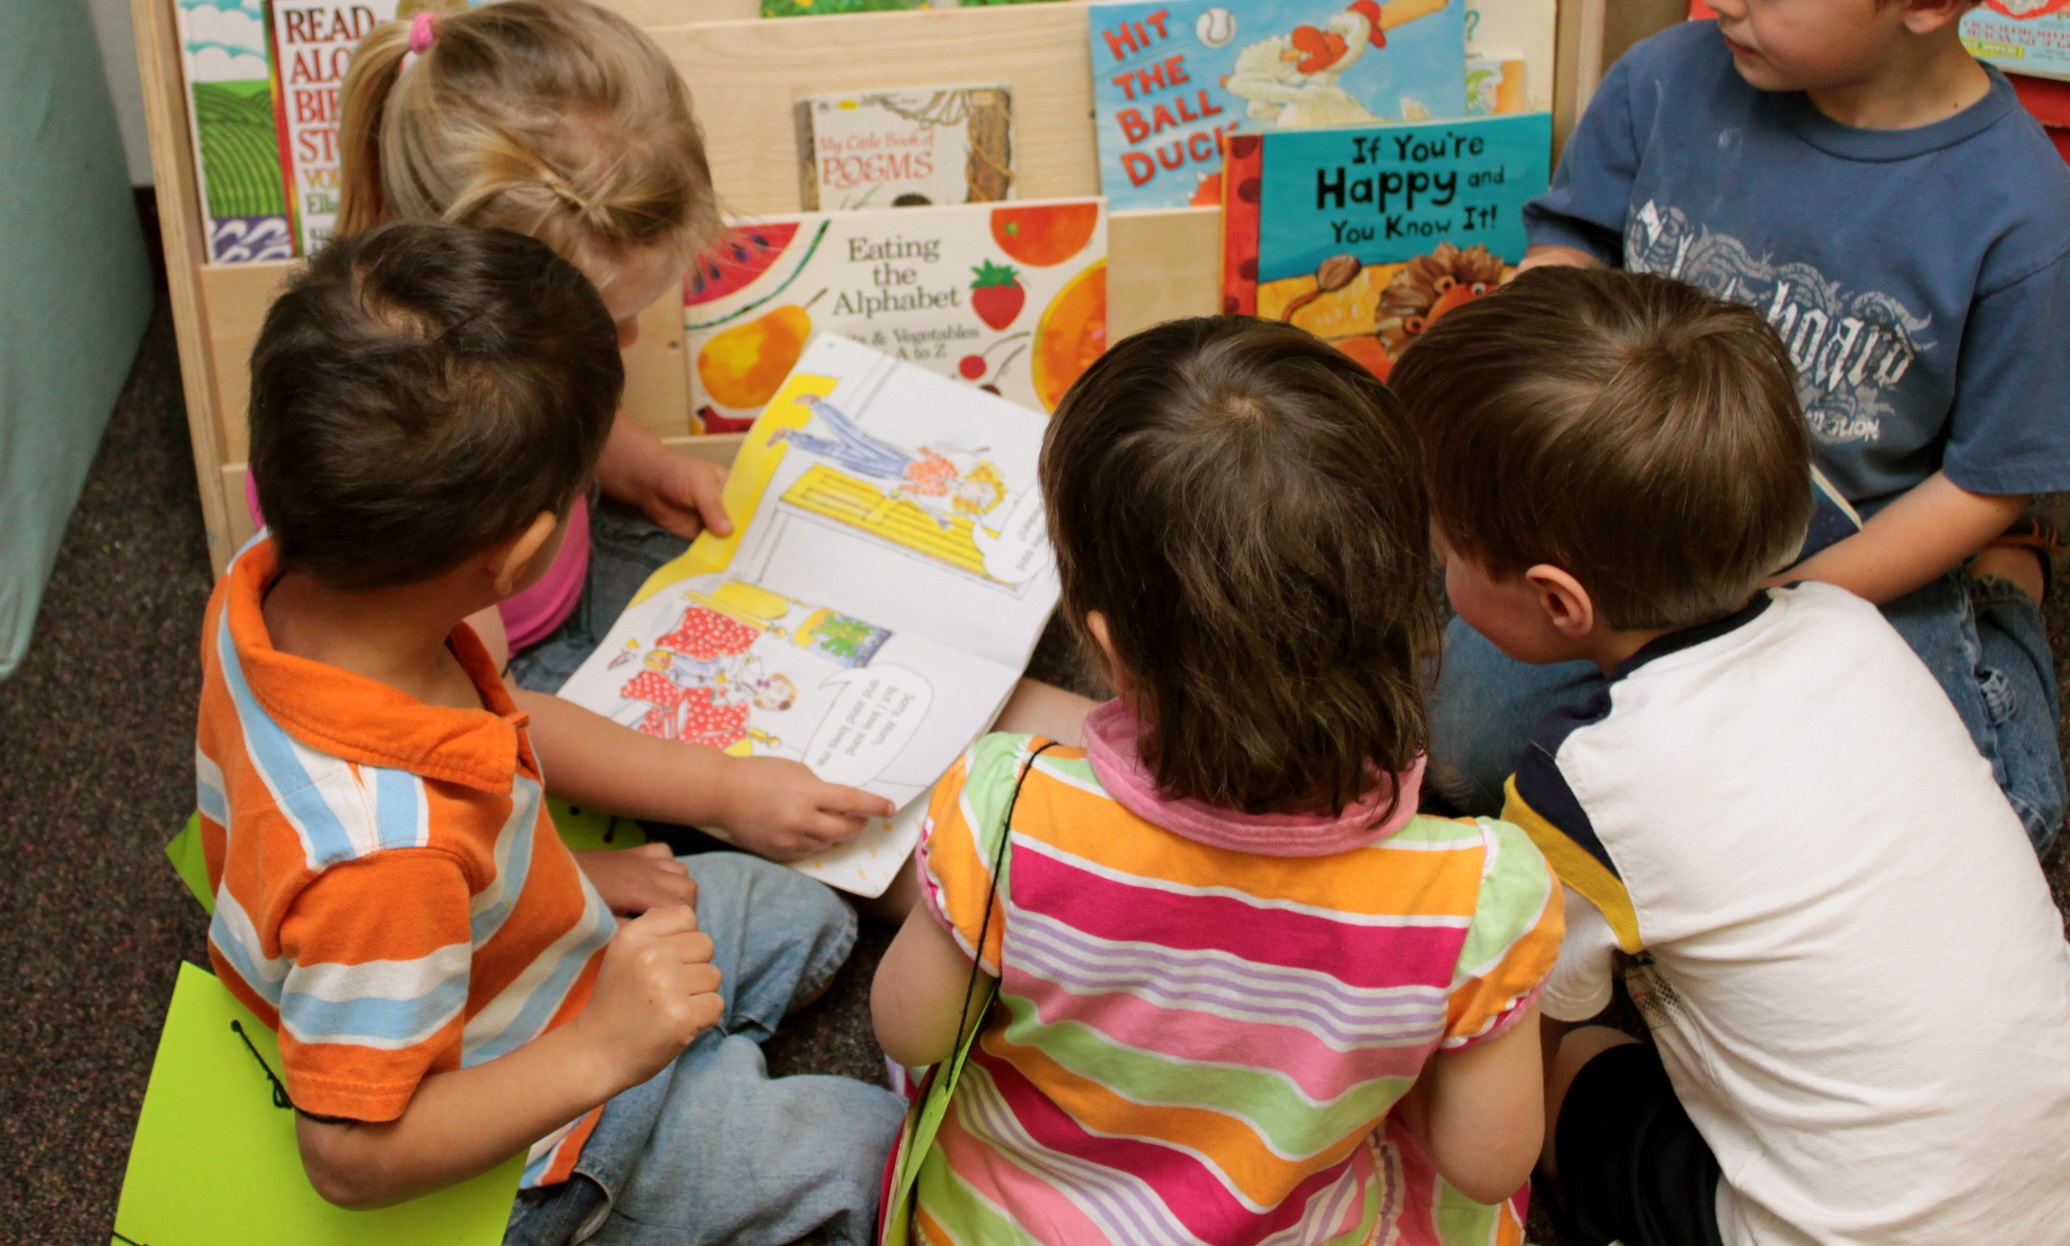 A group of children gathered around a book at child care